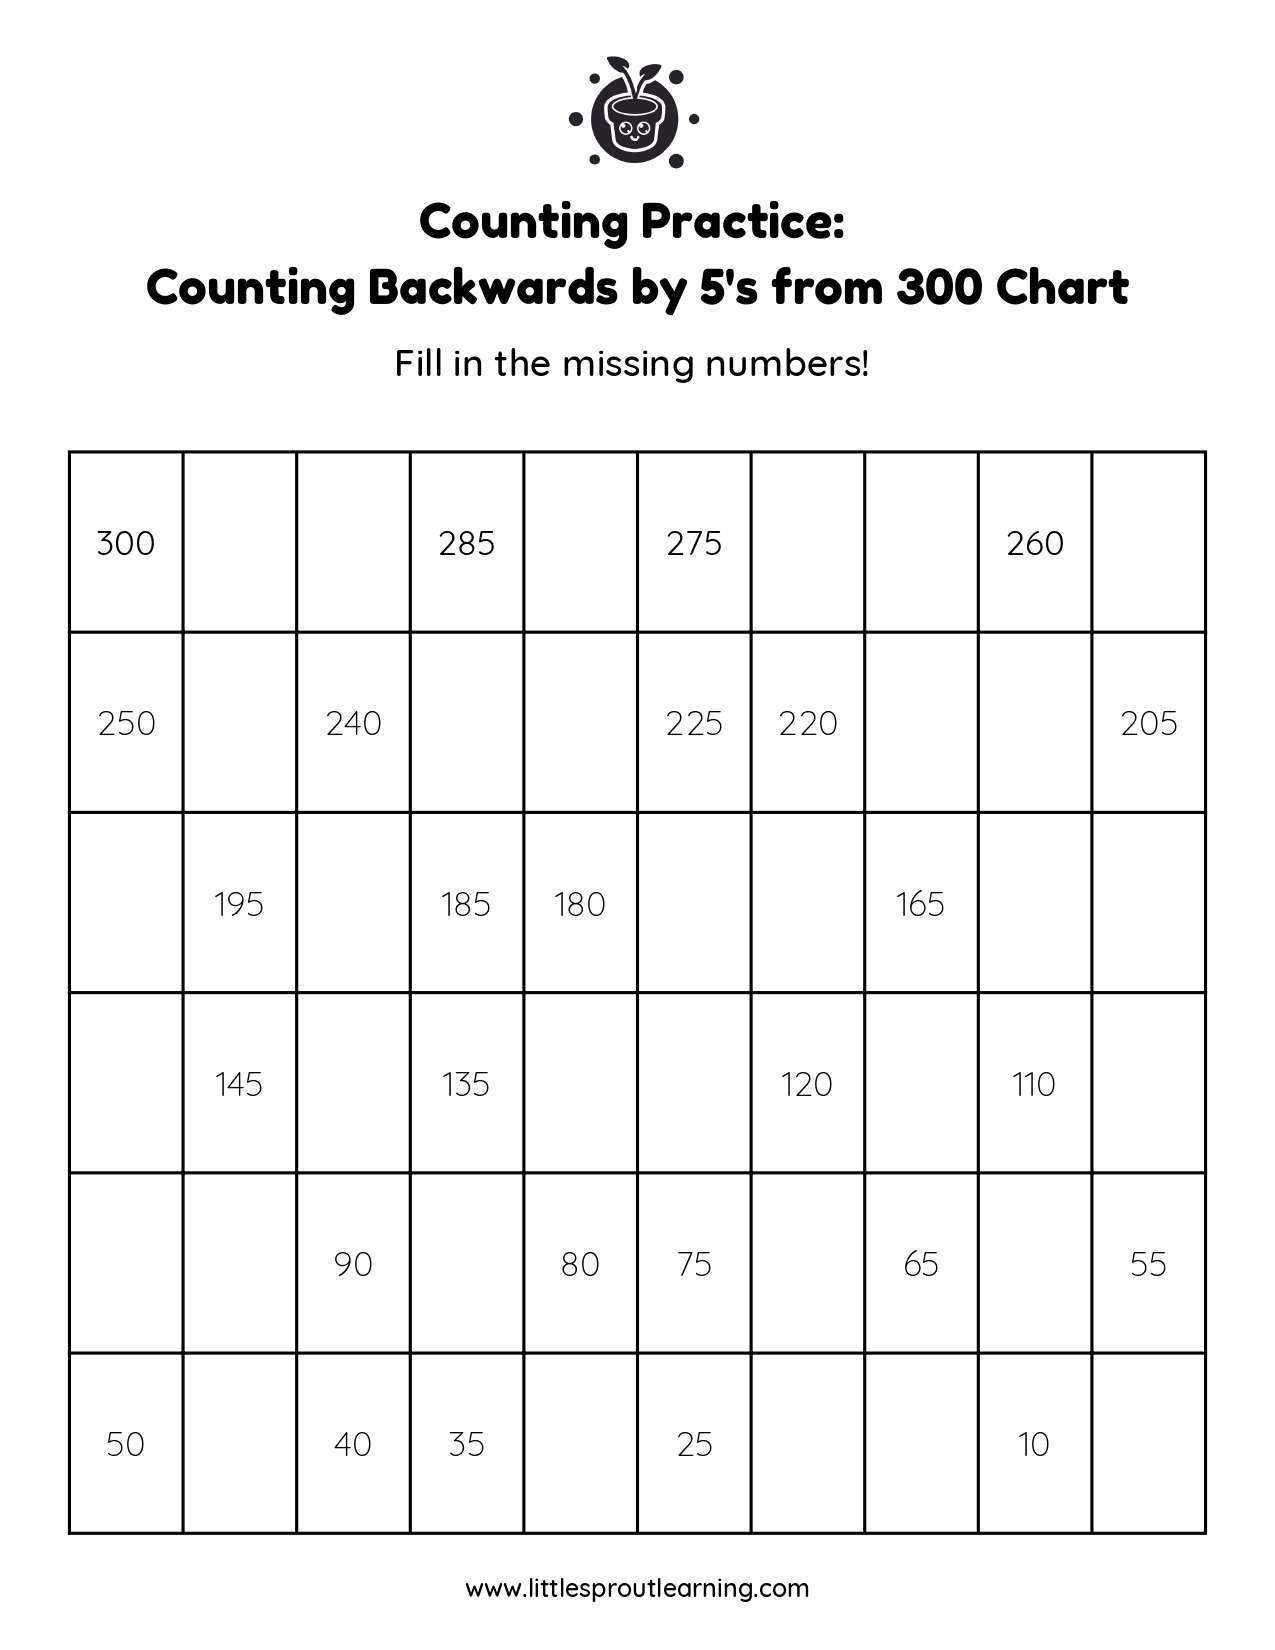 Counting Backwards by 5’s from 300